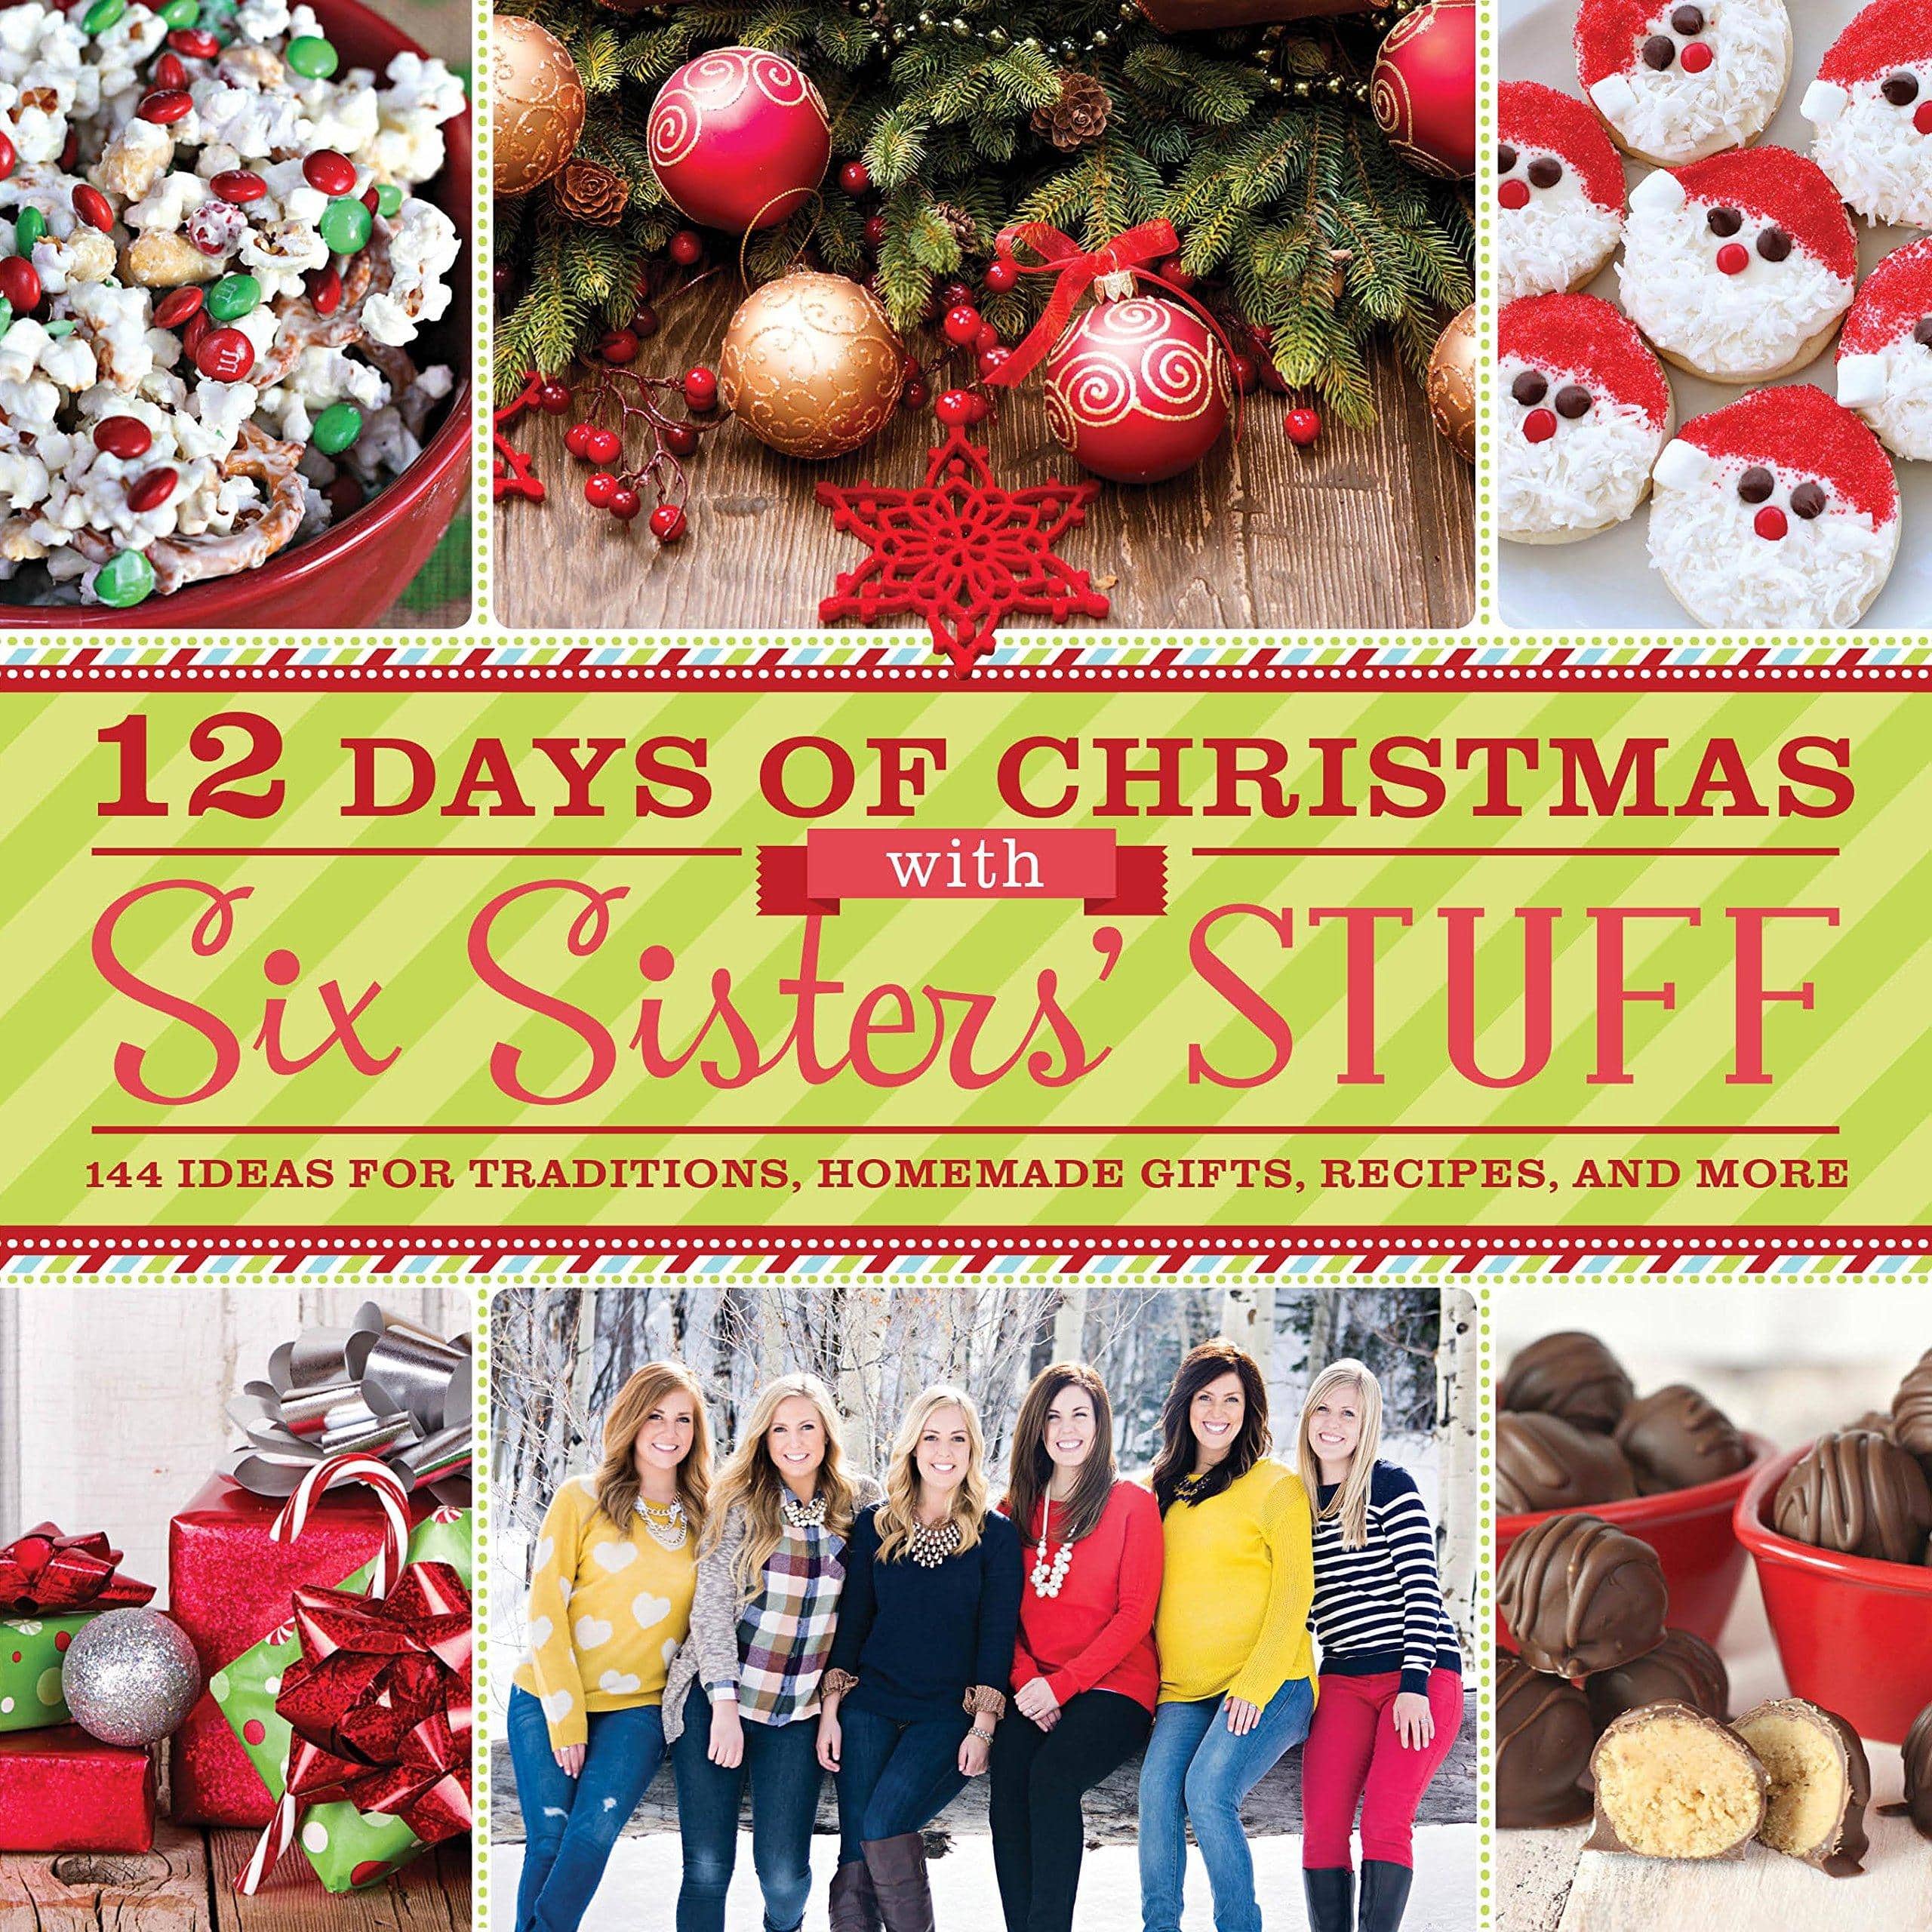 12 Days of Christmas with Six Sisters' Stuff: 144 Ideas for Trad - SureShot Books Publishing LLC